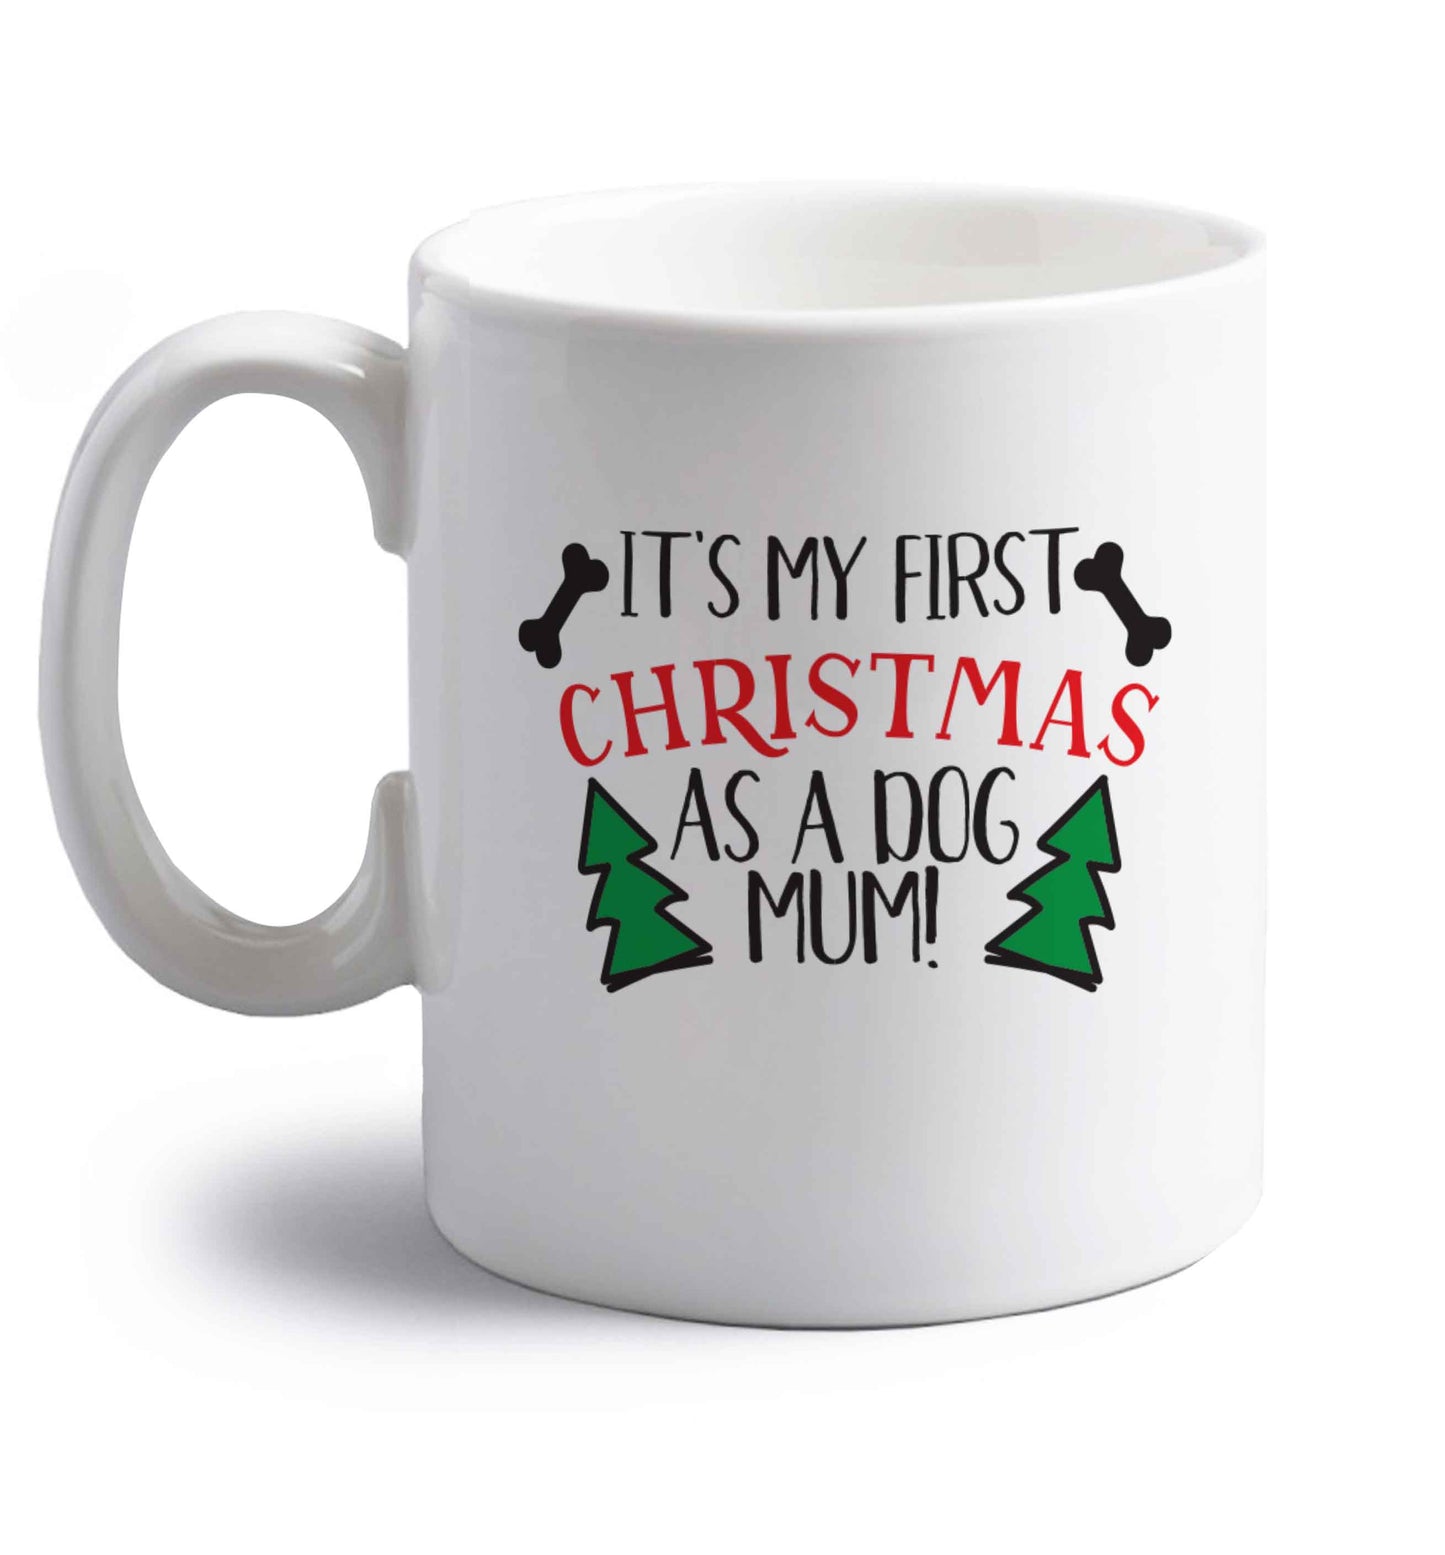 It's my first Christmas as a dog mum! right handed white ceramic mug 